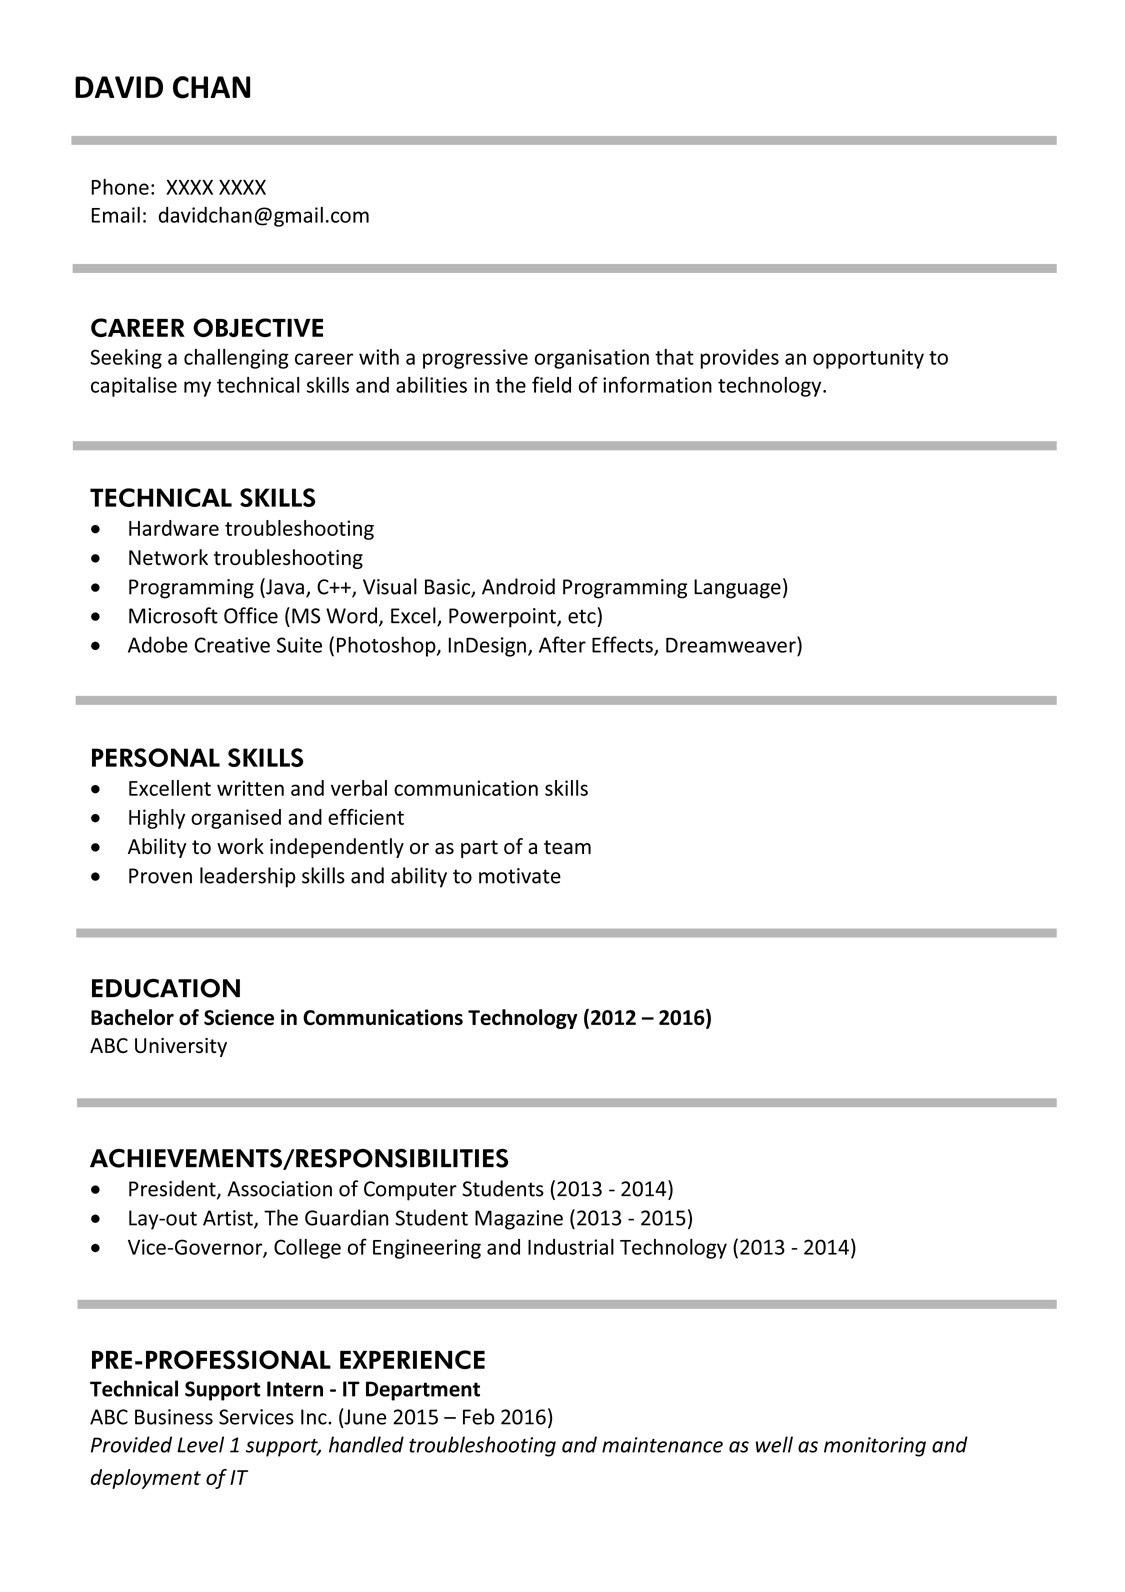 Resume Samples Objective for Technical Field Sample Resume for Fresh Graduates (it Professional) Jobsdb Hong Kong